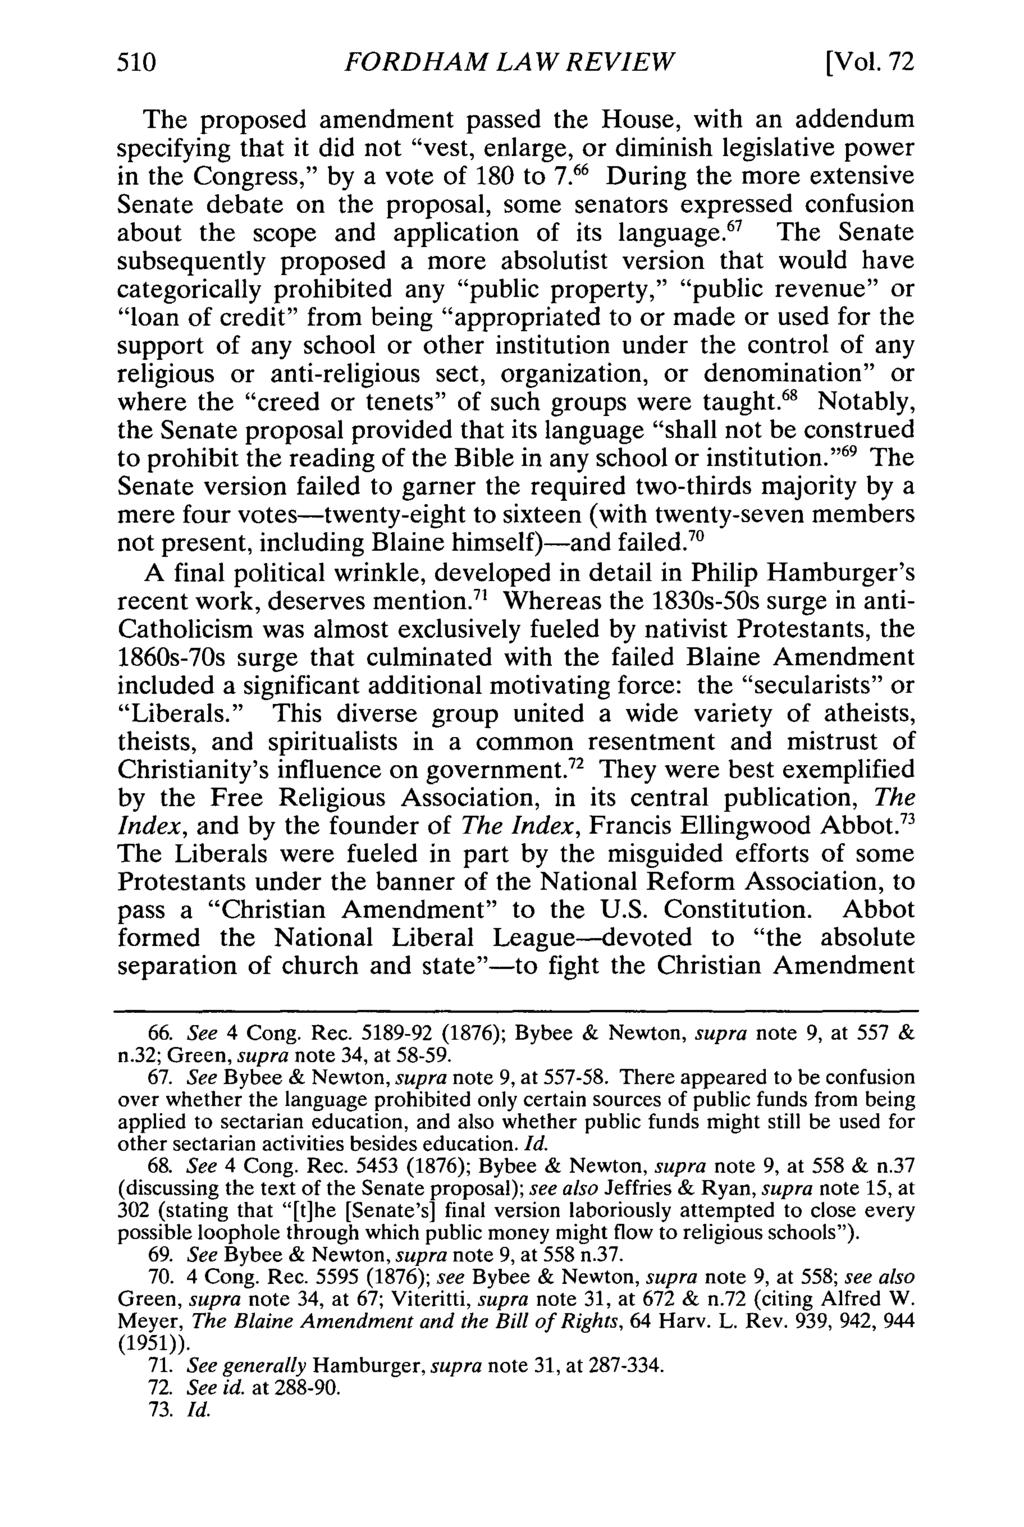 FORDHAM LAW REVIEW [Vol. 72 The proposed amendment passed the House, with an addendum specifying that it did not "vest, enlarge, or diminish legislative power in the Congress," by a vote of 180 to 7.